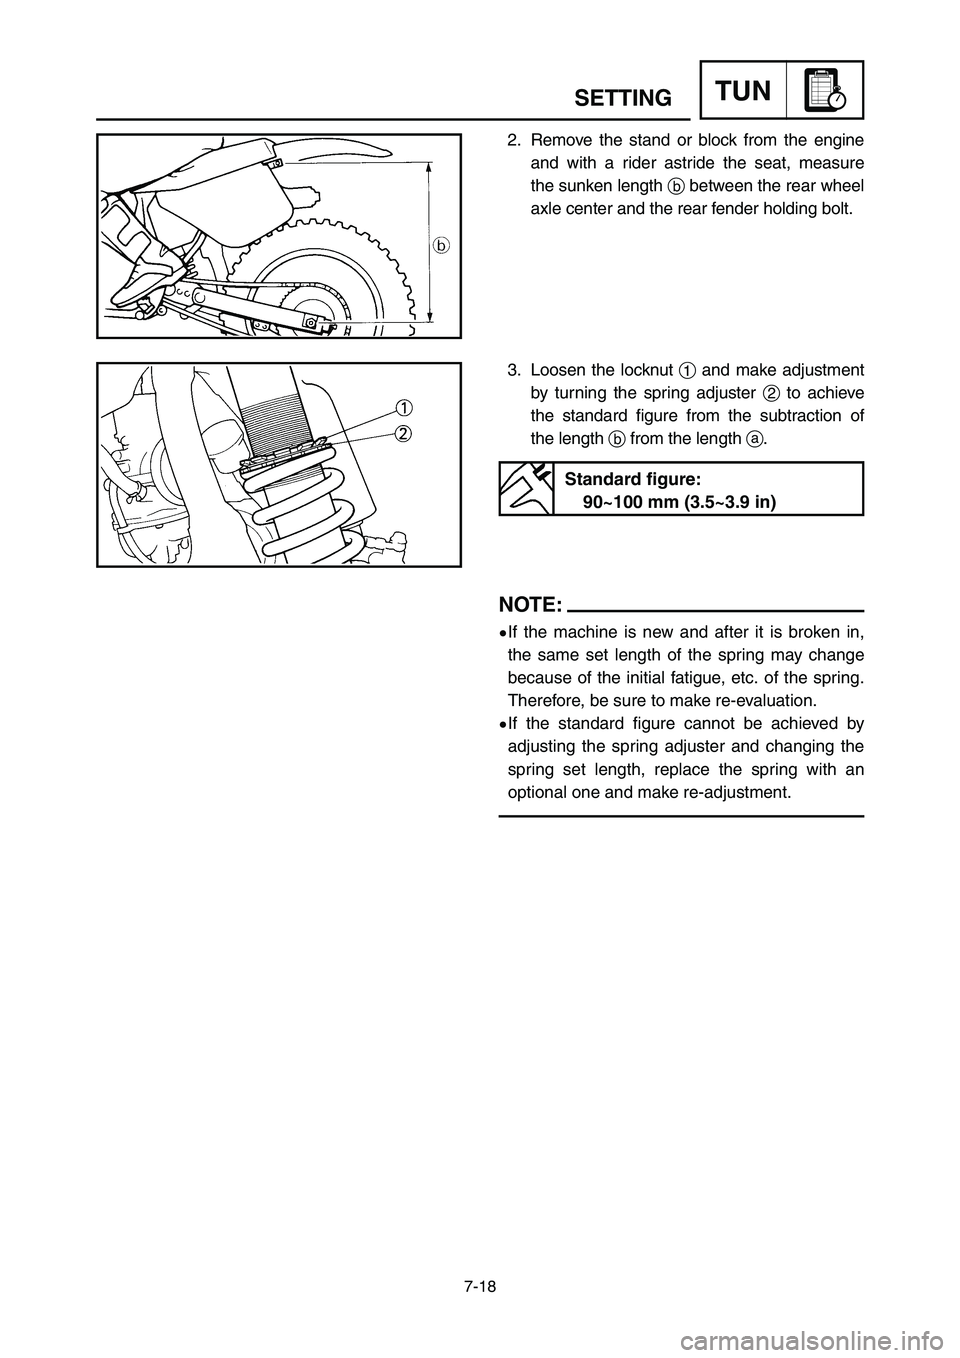 YAMAHA YZ125LC 2007  Owners Manual 7-18
TUNSETTING
2. Remove the stand or block from the engine
and with a rider astride the seat, measure
the sunken length bbetween the rear wheel
axle center and the rear fender holding bolt.
3. Loose